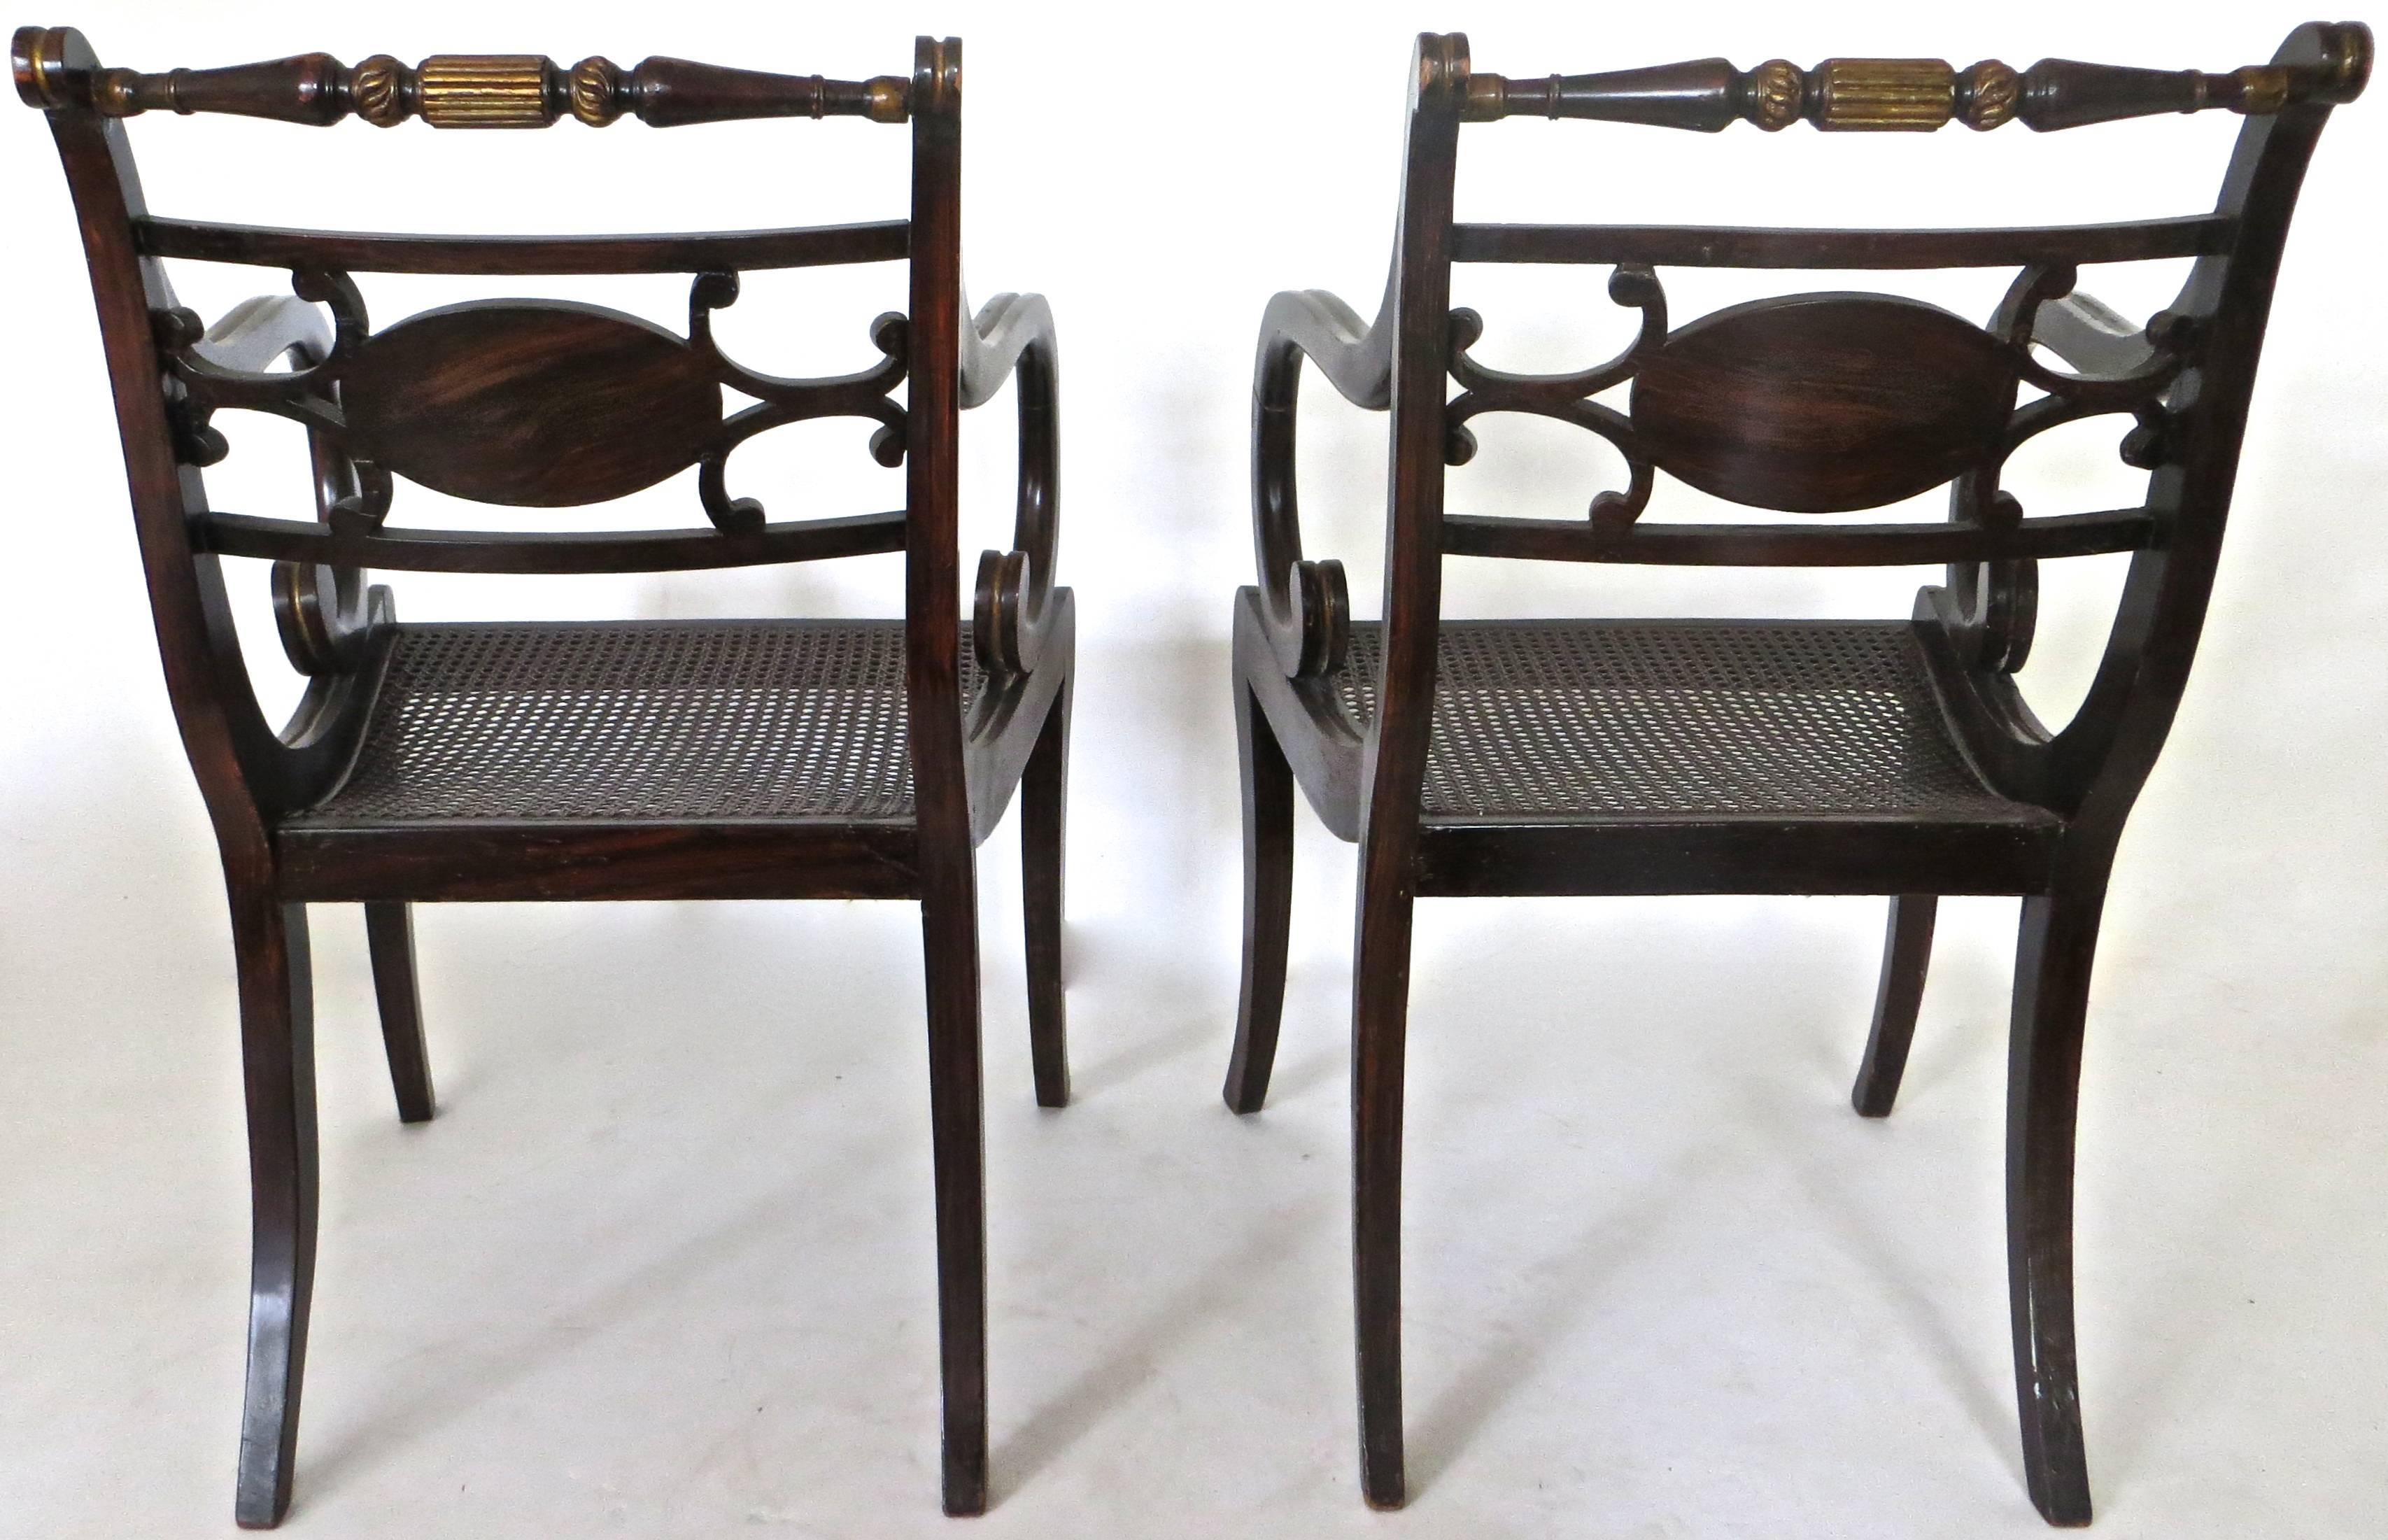 Pair of Regency Faux Rosewood Japanned and Parcel Gilt Armchairs, circa 1810 In Excellent Condition For Sale In Incline Village, NV